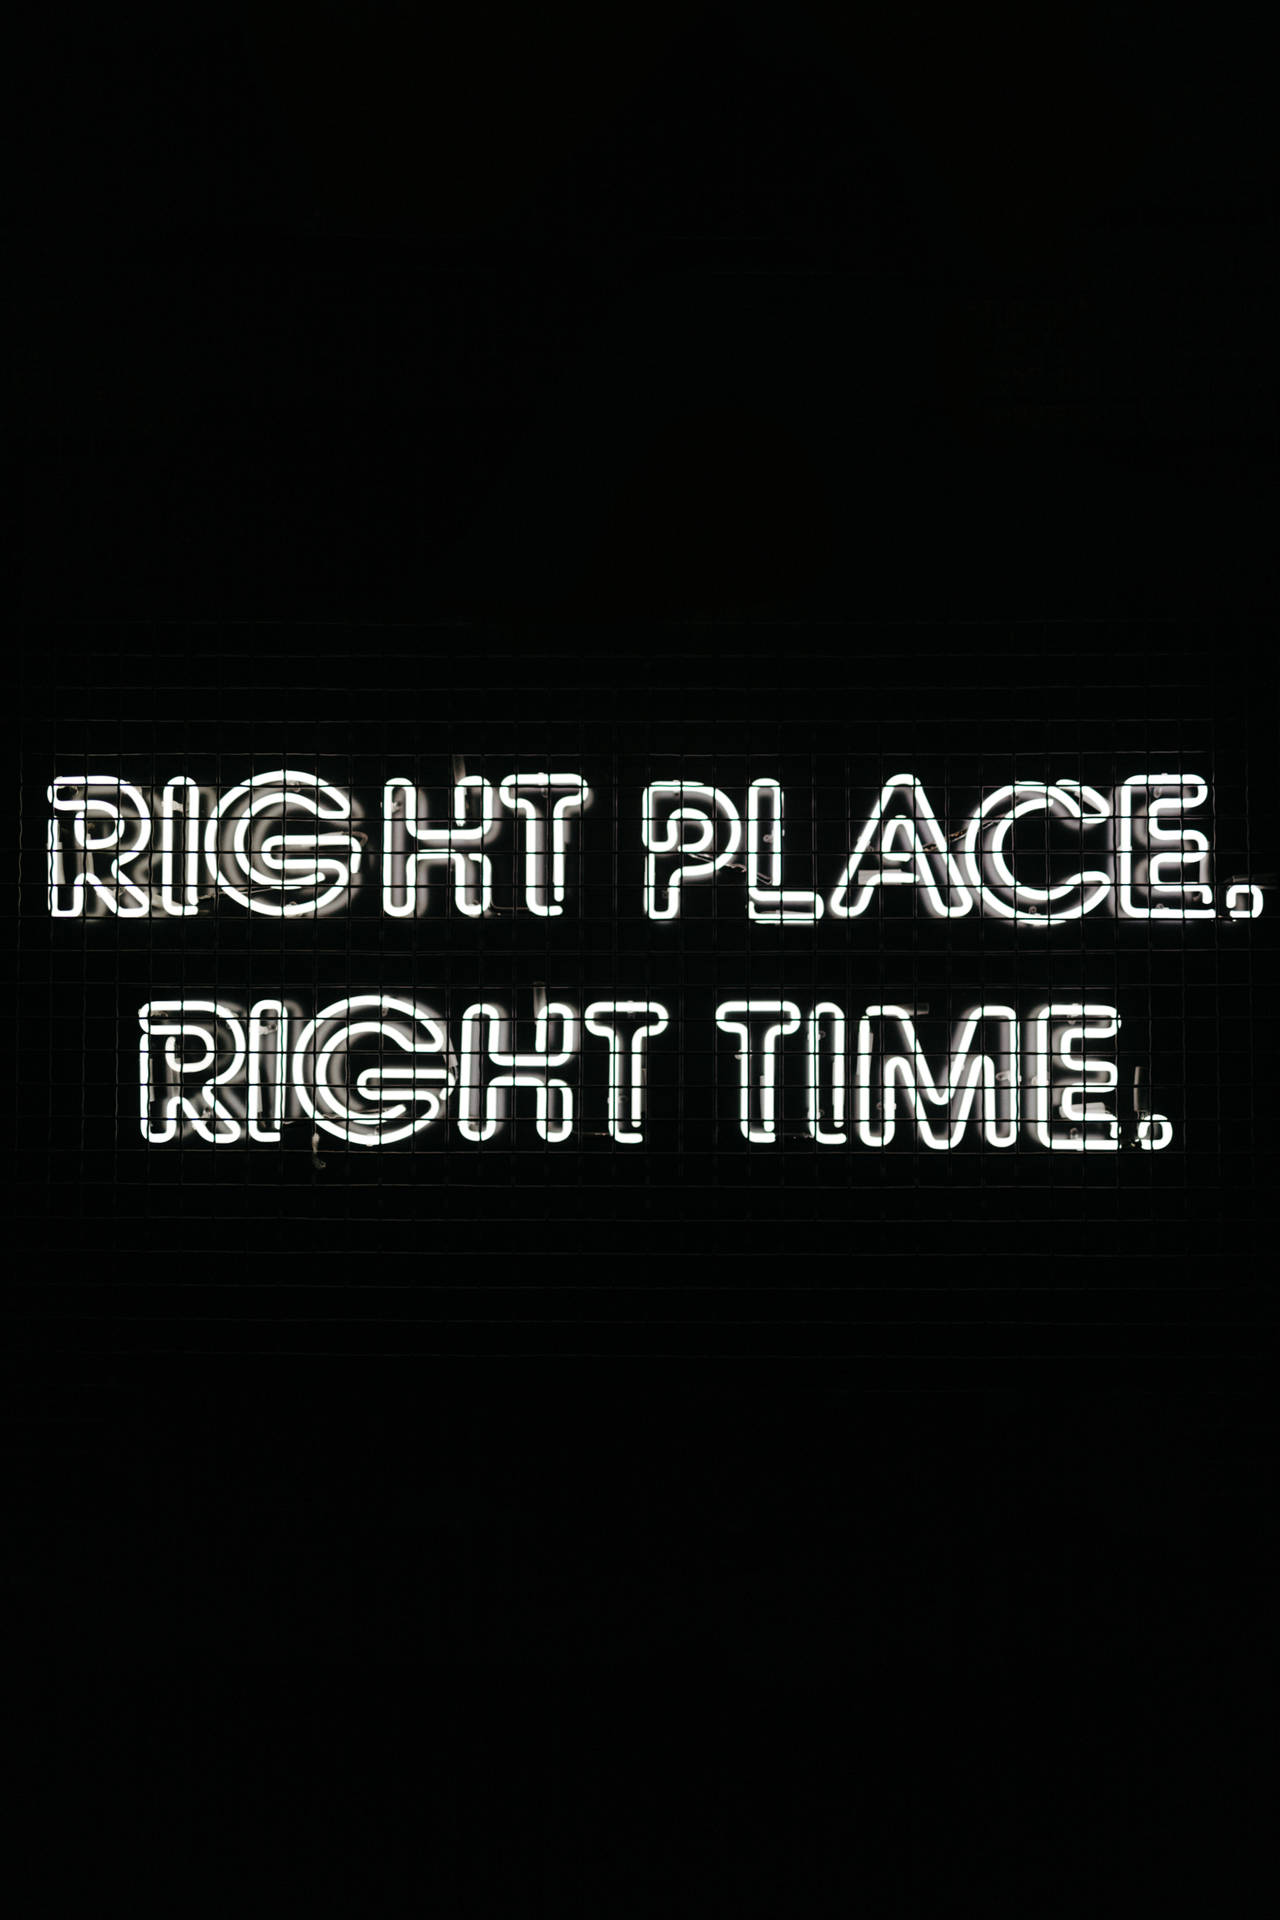 Right Place White Neon Aesthetic Wallpaper